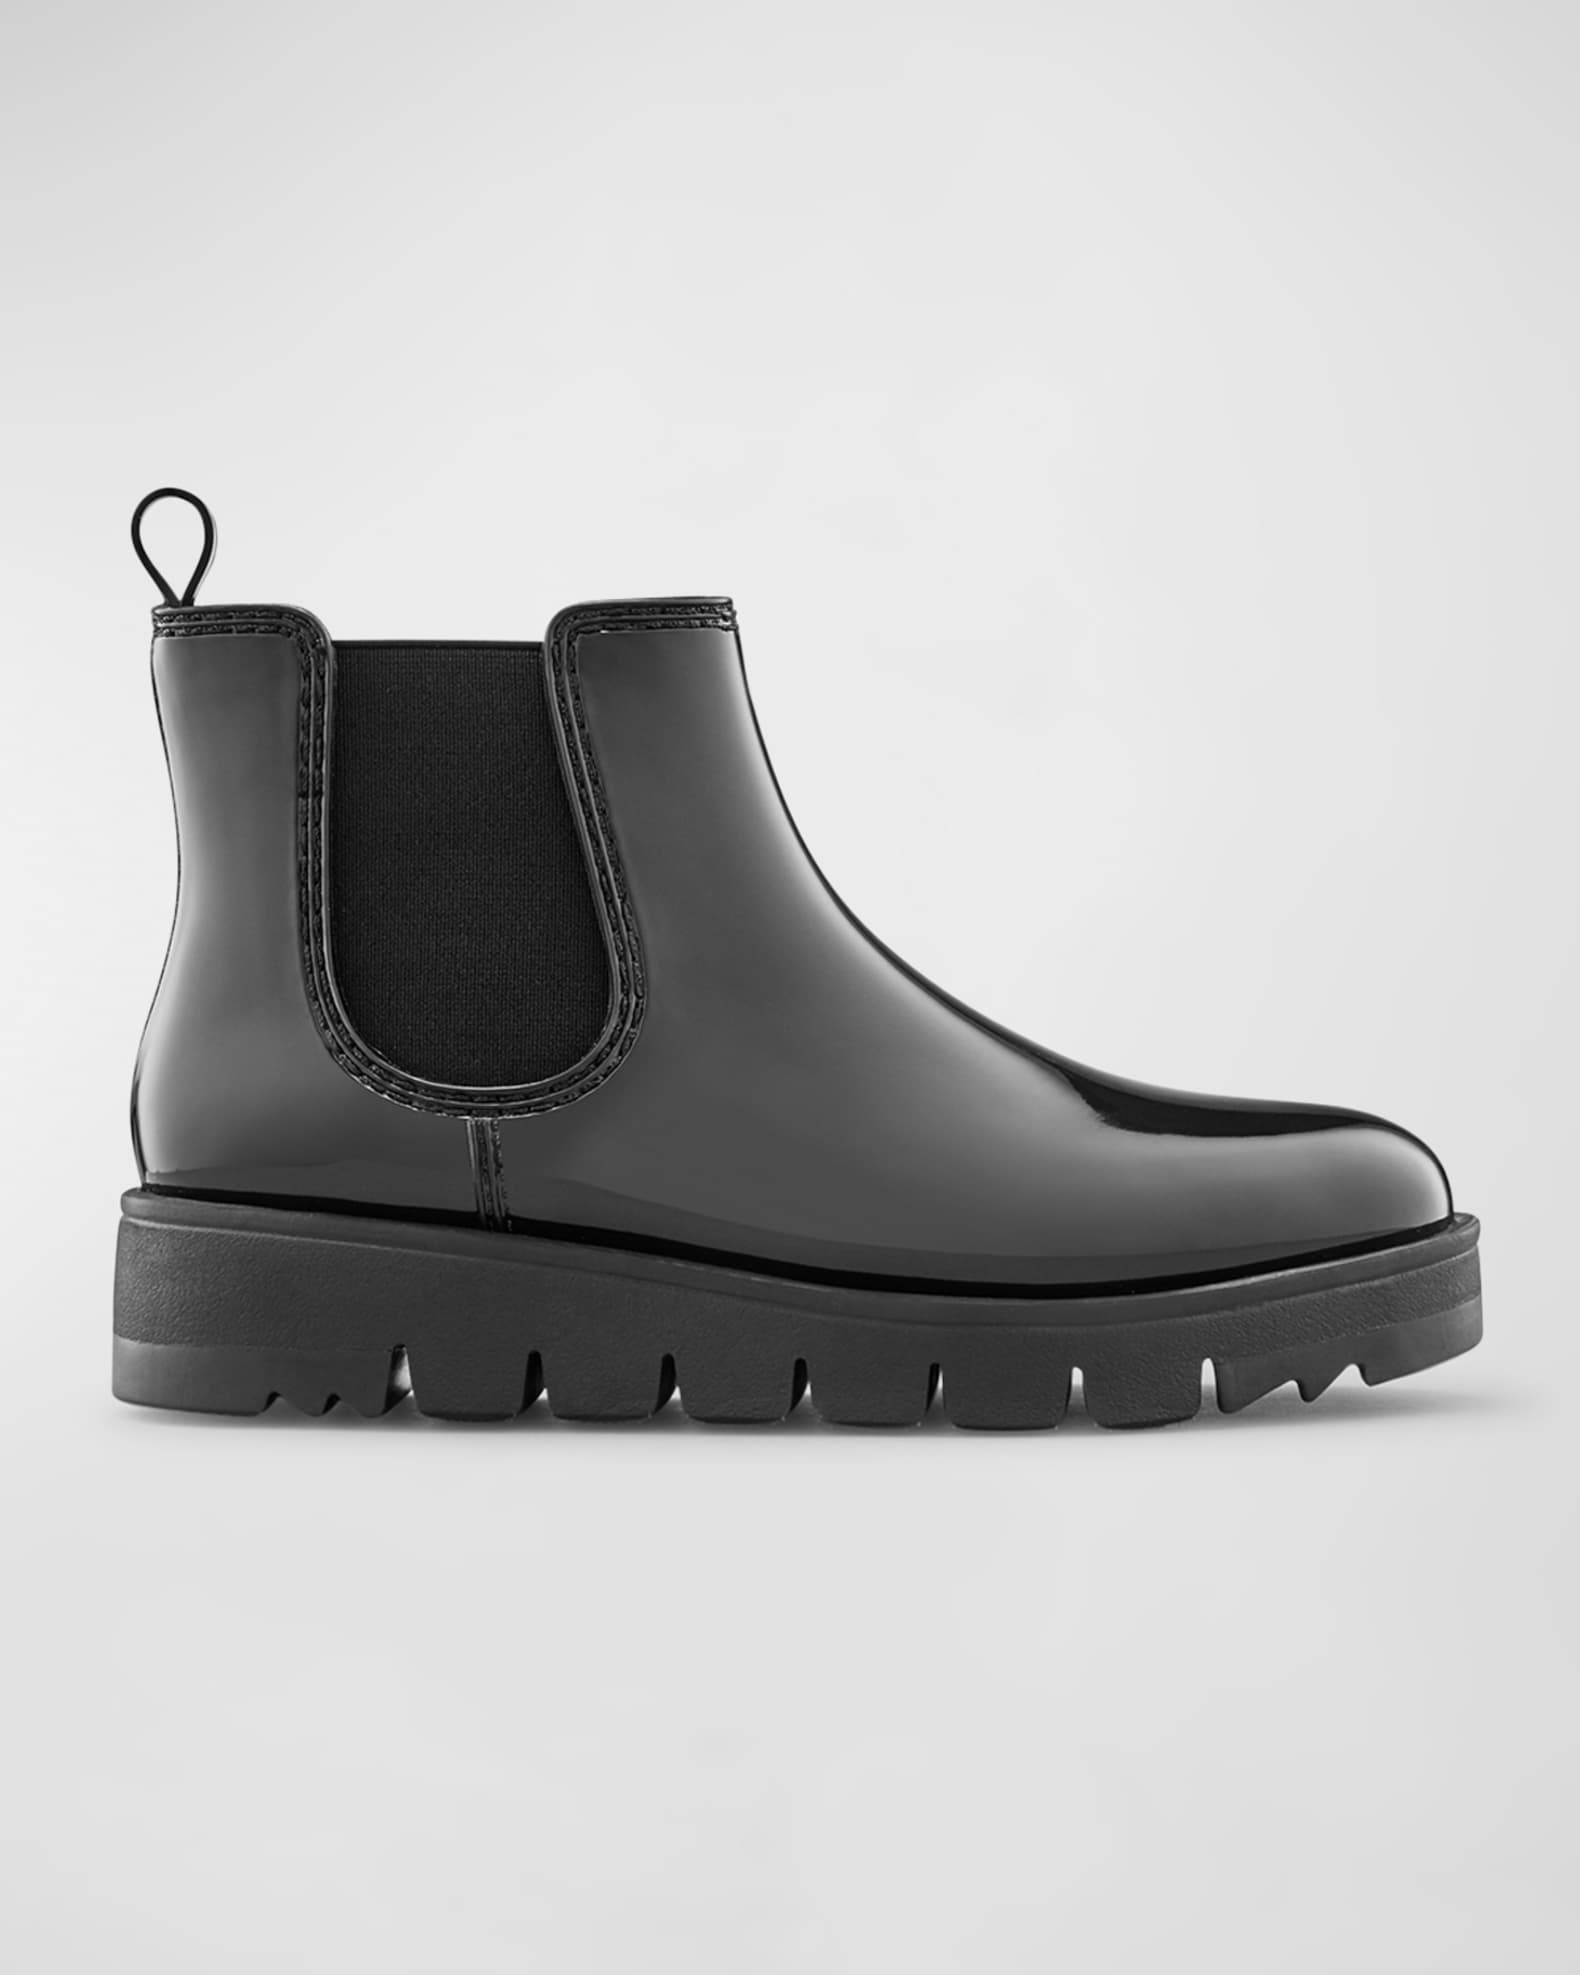 The Rain Capsule, a Collection of Waterproof Shoes from Louis Vuitton